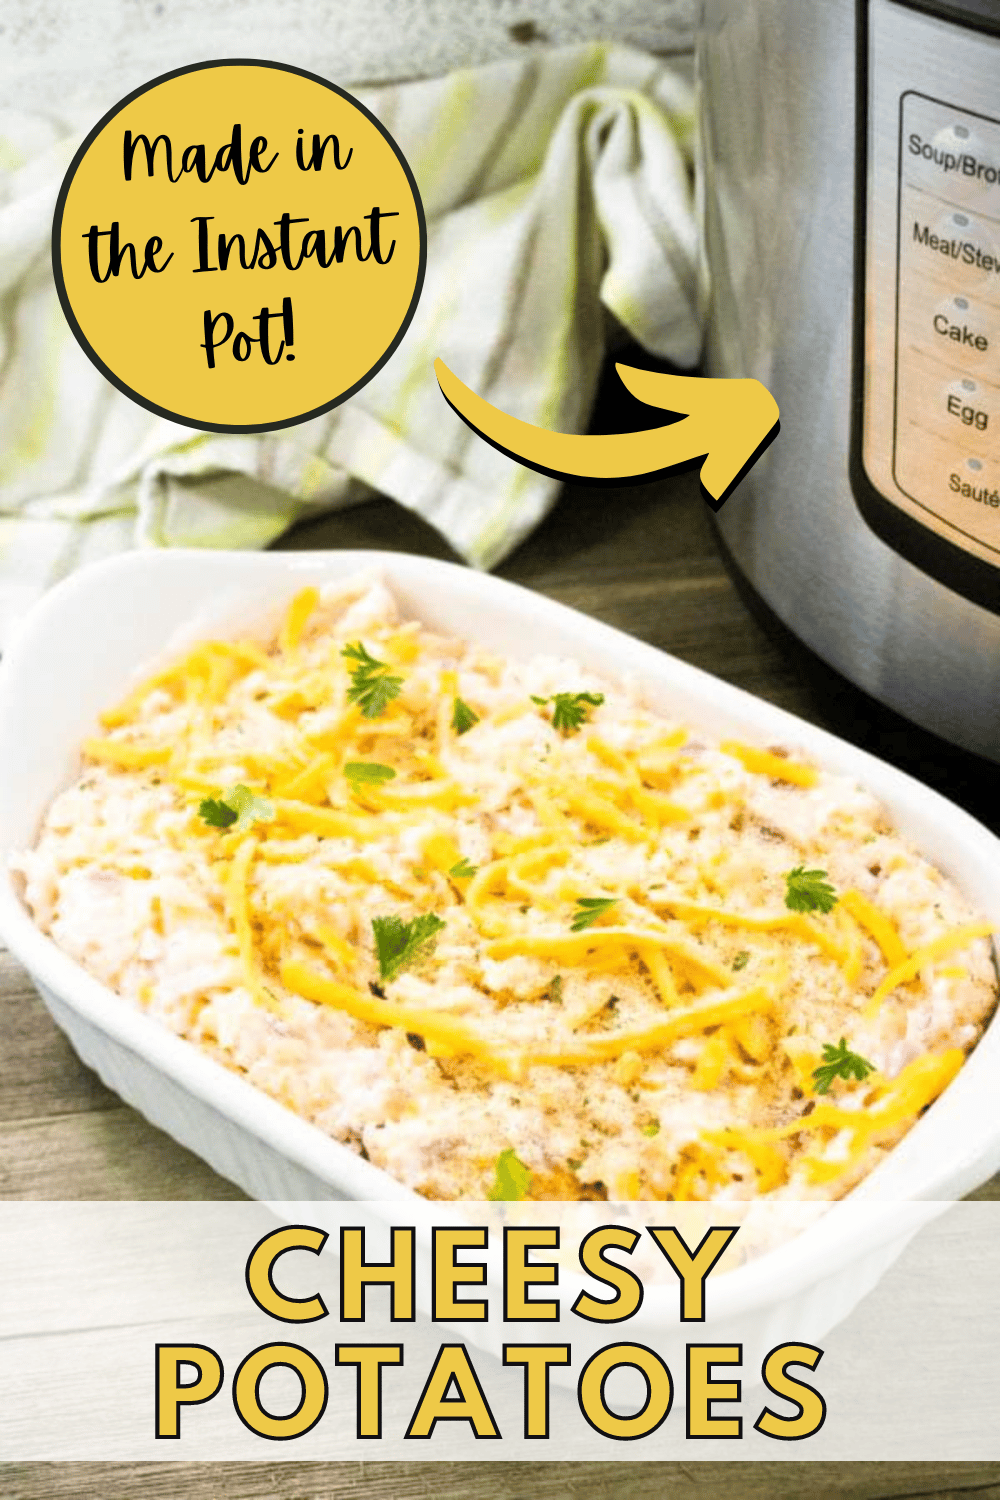 These Instant Pot Cheesy Potatoes are a crowd-pleasing side dish. Also known as funeral potatoes, this casserole is a classic comfort food. #instantpot #pressurecooker #sidedish #potatoes #instantpotcheesypotatoes via @wondermomwannab